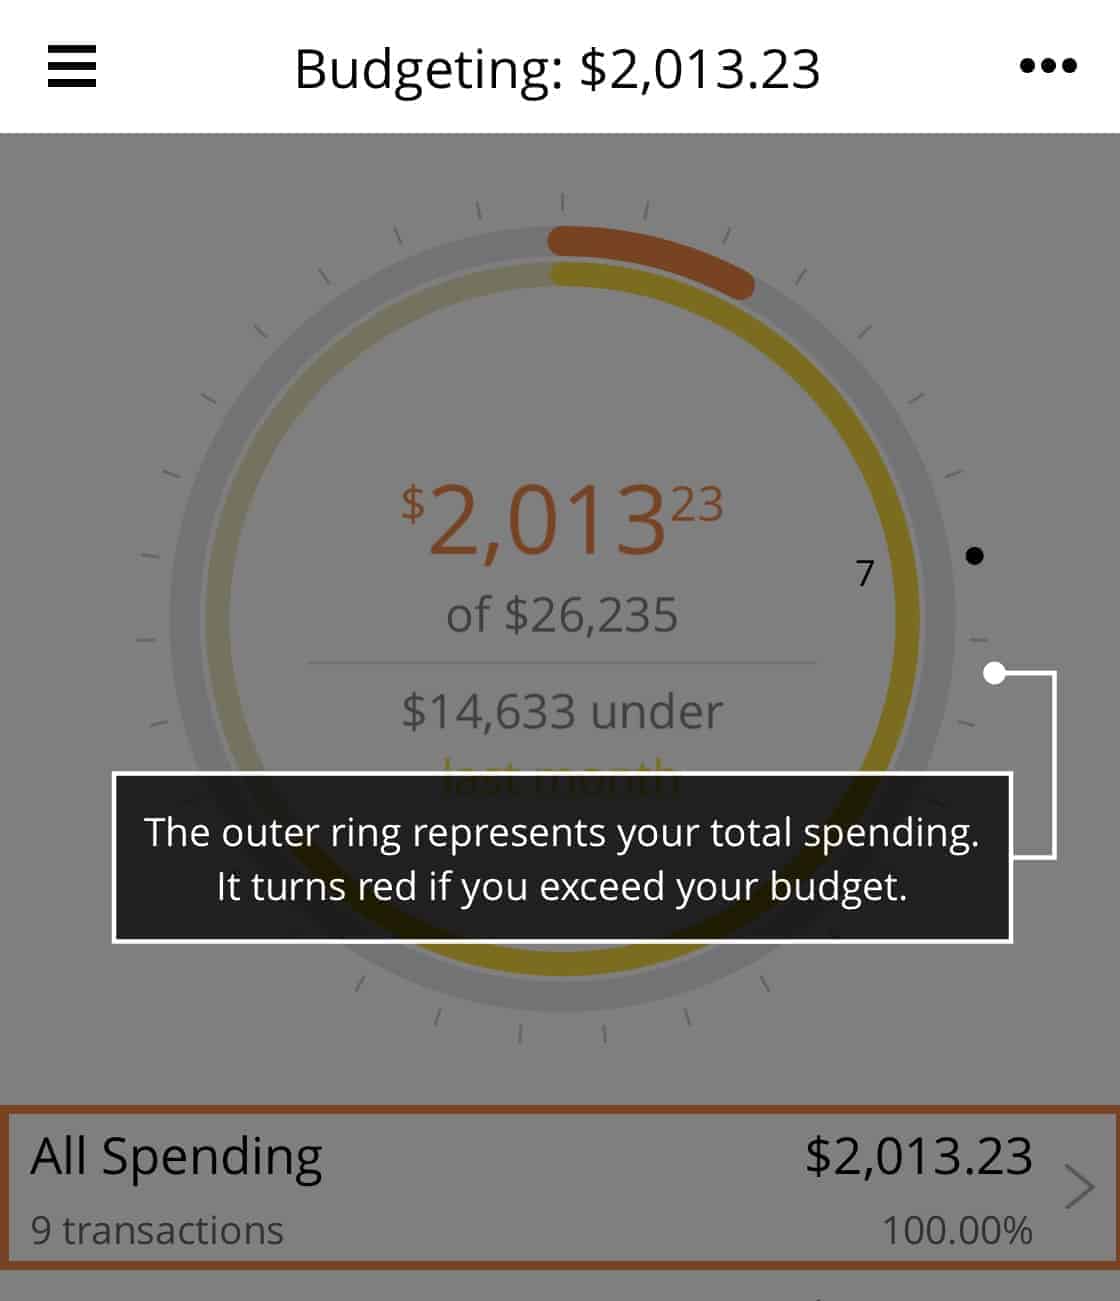 Personal Capital Budgeting Tracker shows the Current Month budget via the outer ring